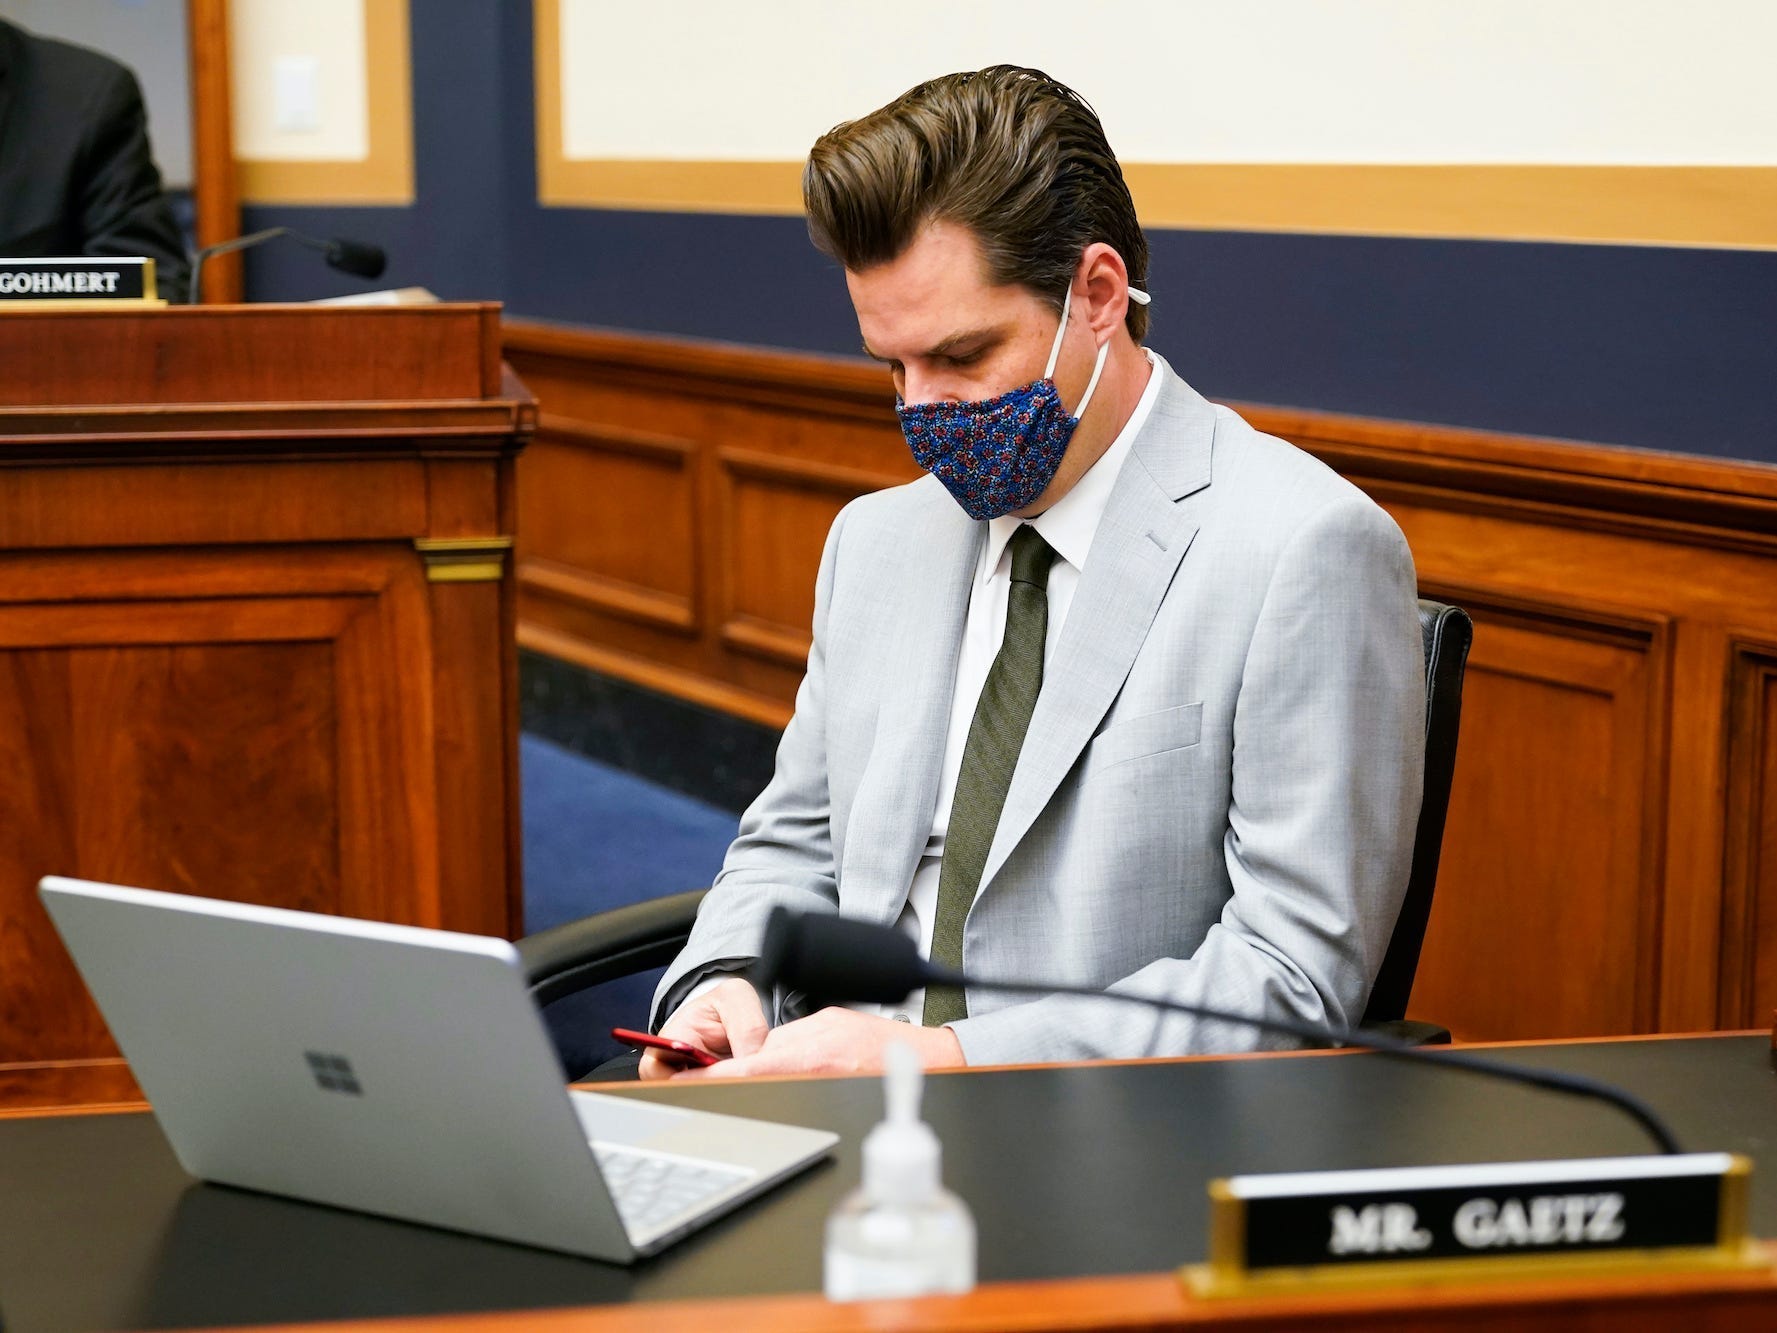 Rep. Matt Gaetz, R-Fla., looks at his phone during a House Judiciary committee hearing at the Capitol in Washington, Wednesday, April 14, 2021. (AP Photo/J. Scott Applewhite)